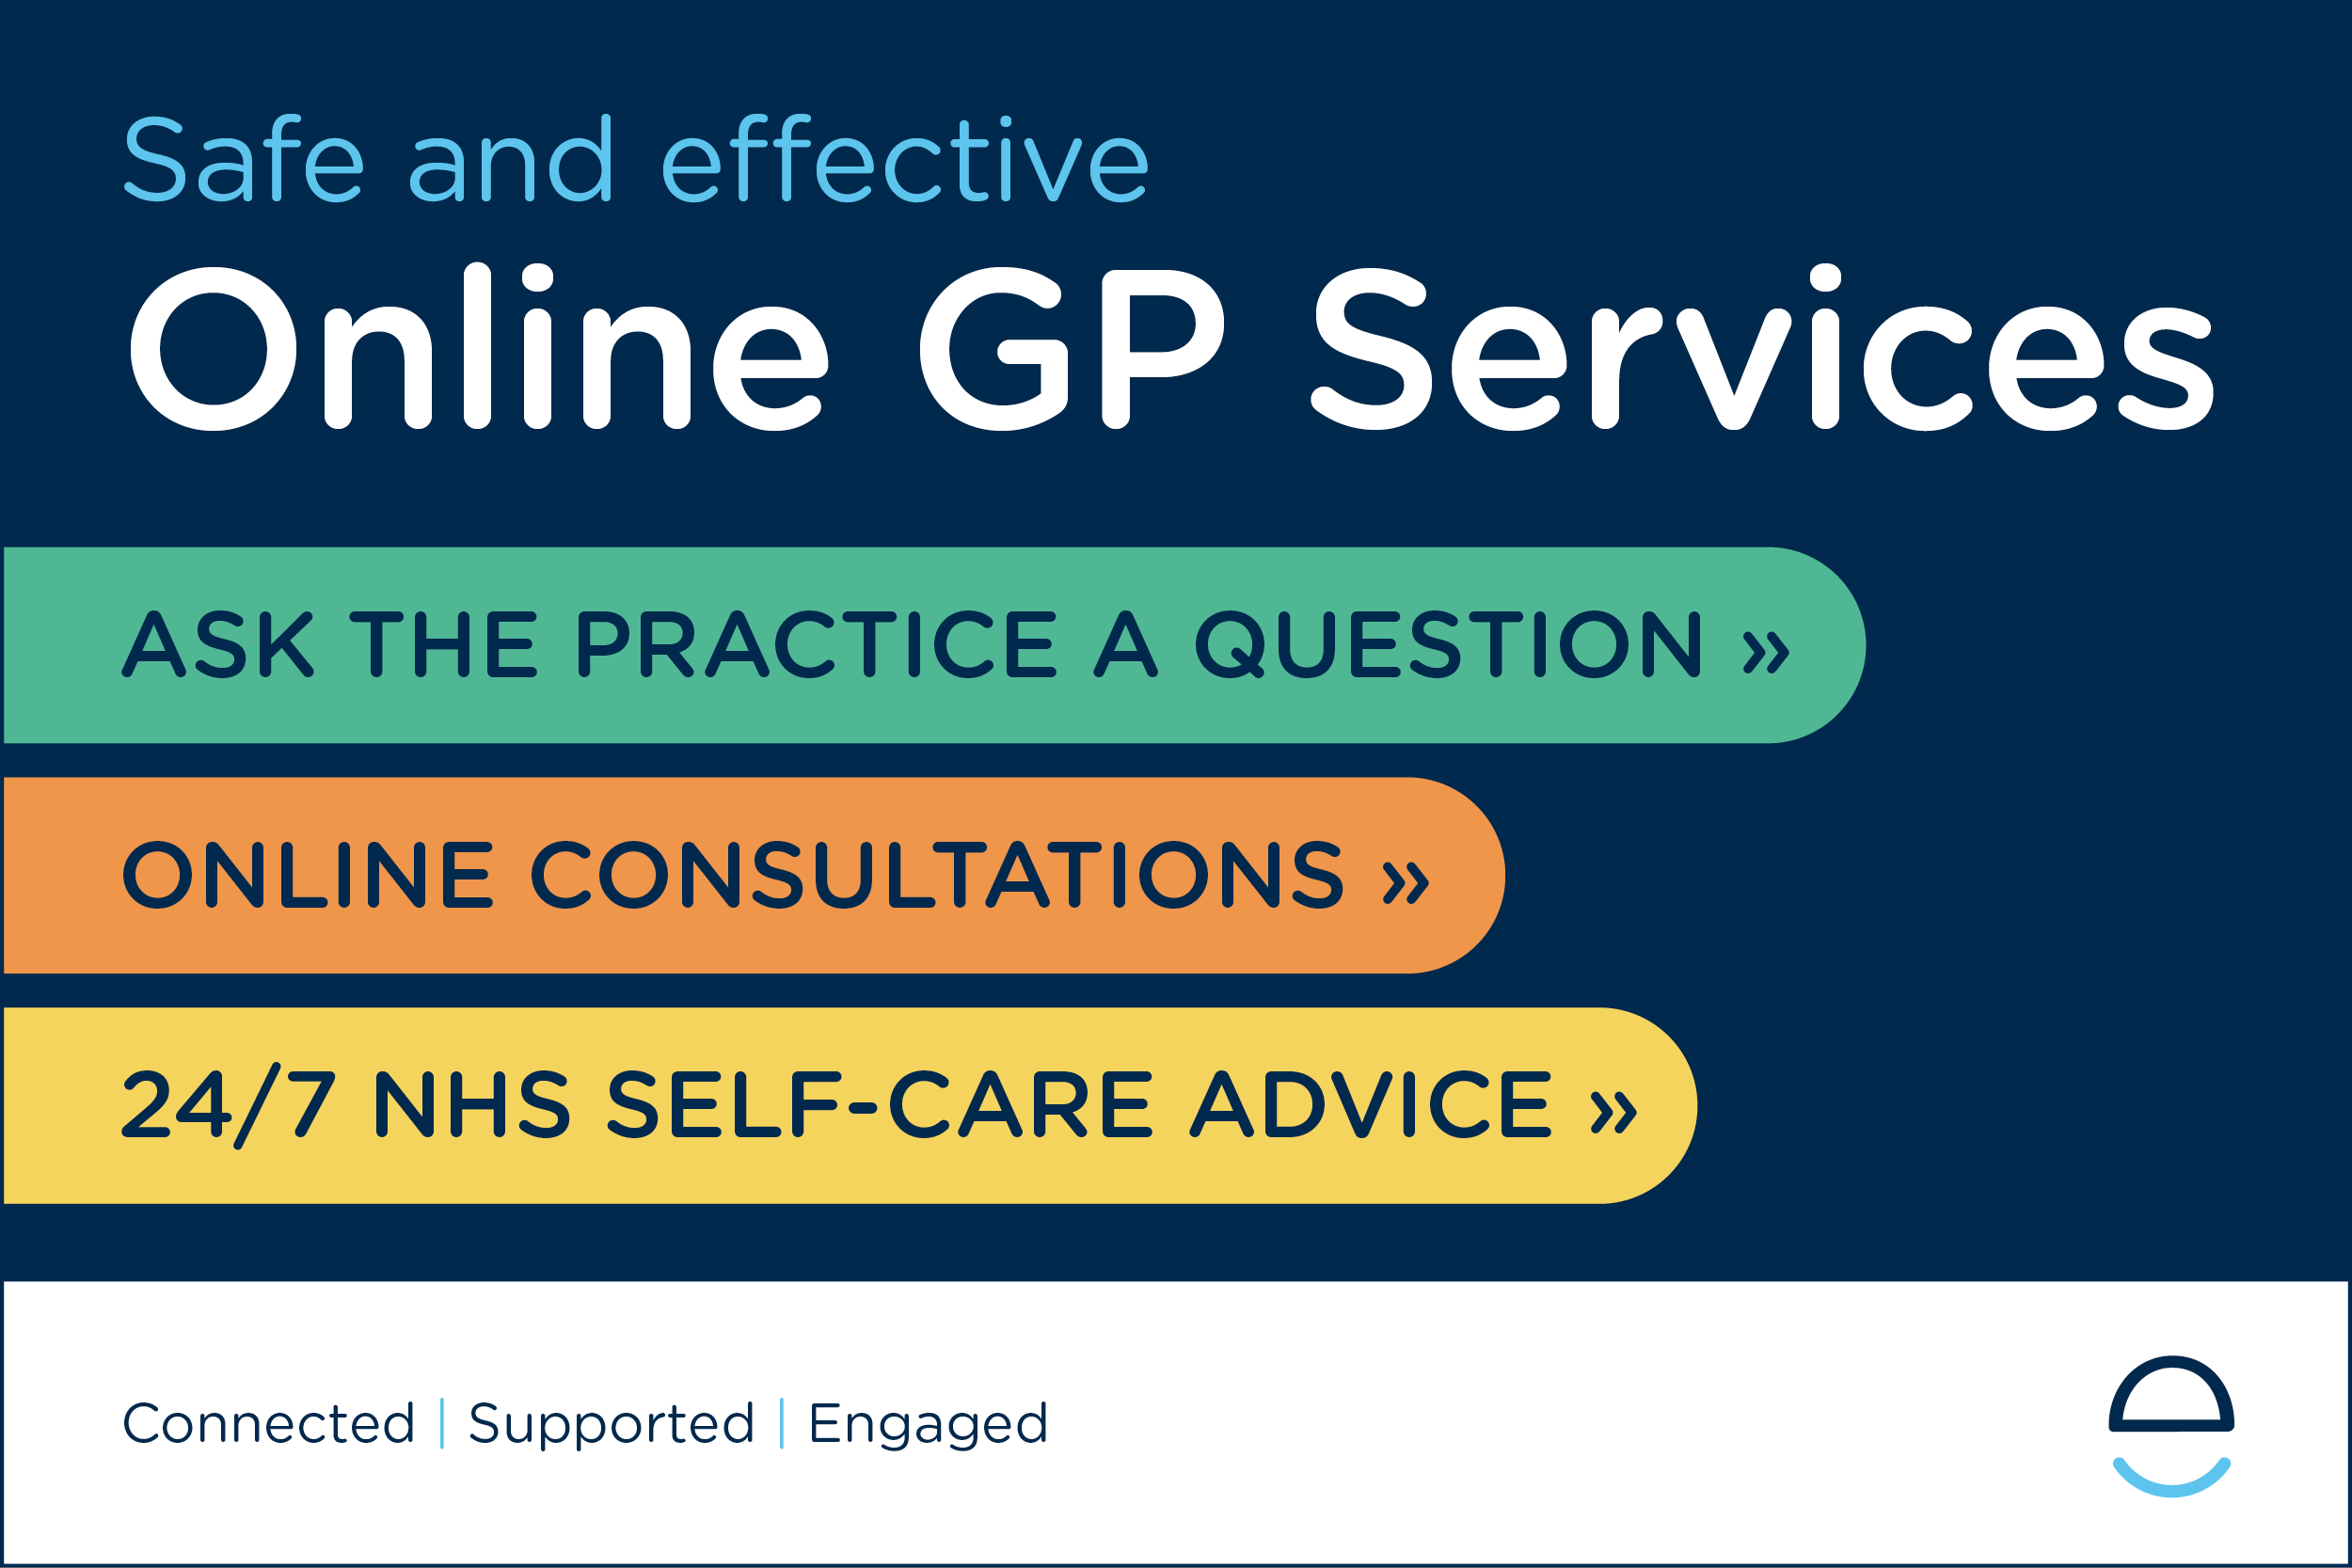 Safe and effective online GP Services. Ask the practice a question. Online consultations. 24/7 NHS self care advice